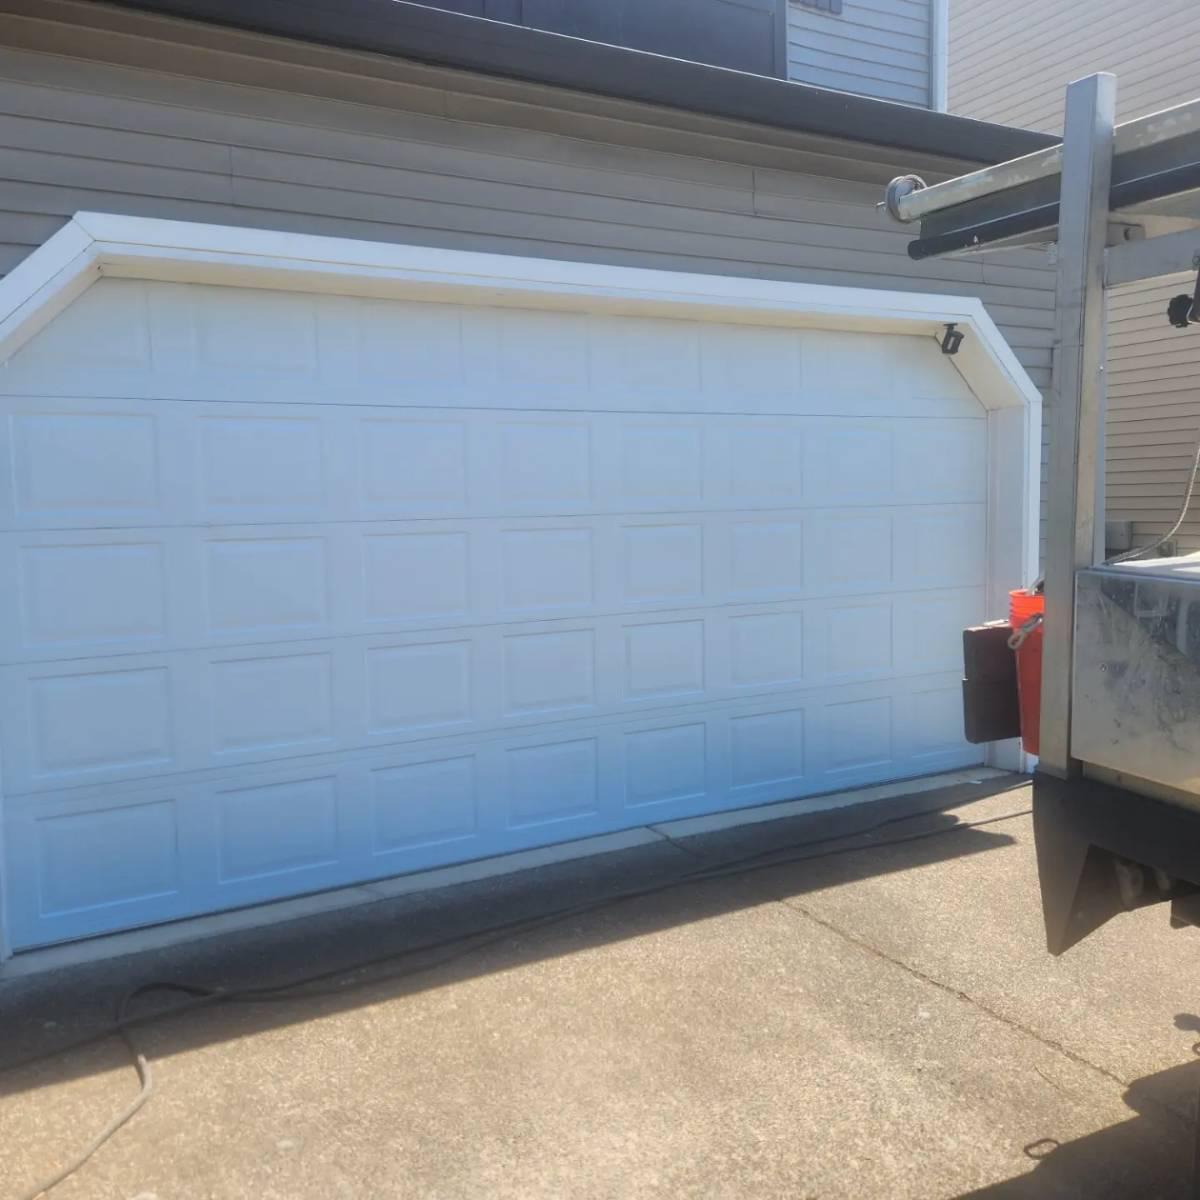 B&C Industries takes pride in crafting custom garage doors that reflect your unique taste and architectural preferences. Whether you're seeking a distinctive design, specific materials, or personalized finishes, our team will work closely with you to create a one-of-a-kind garage door that complements your home's aesthetics.